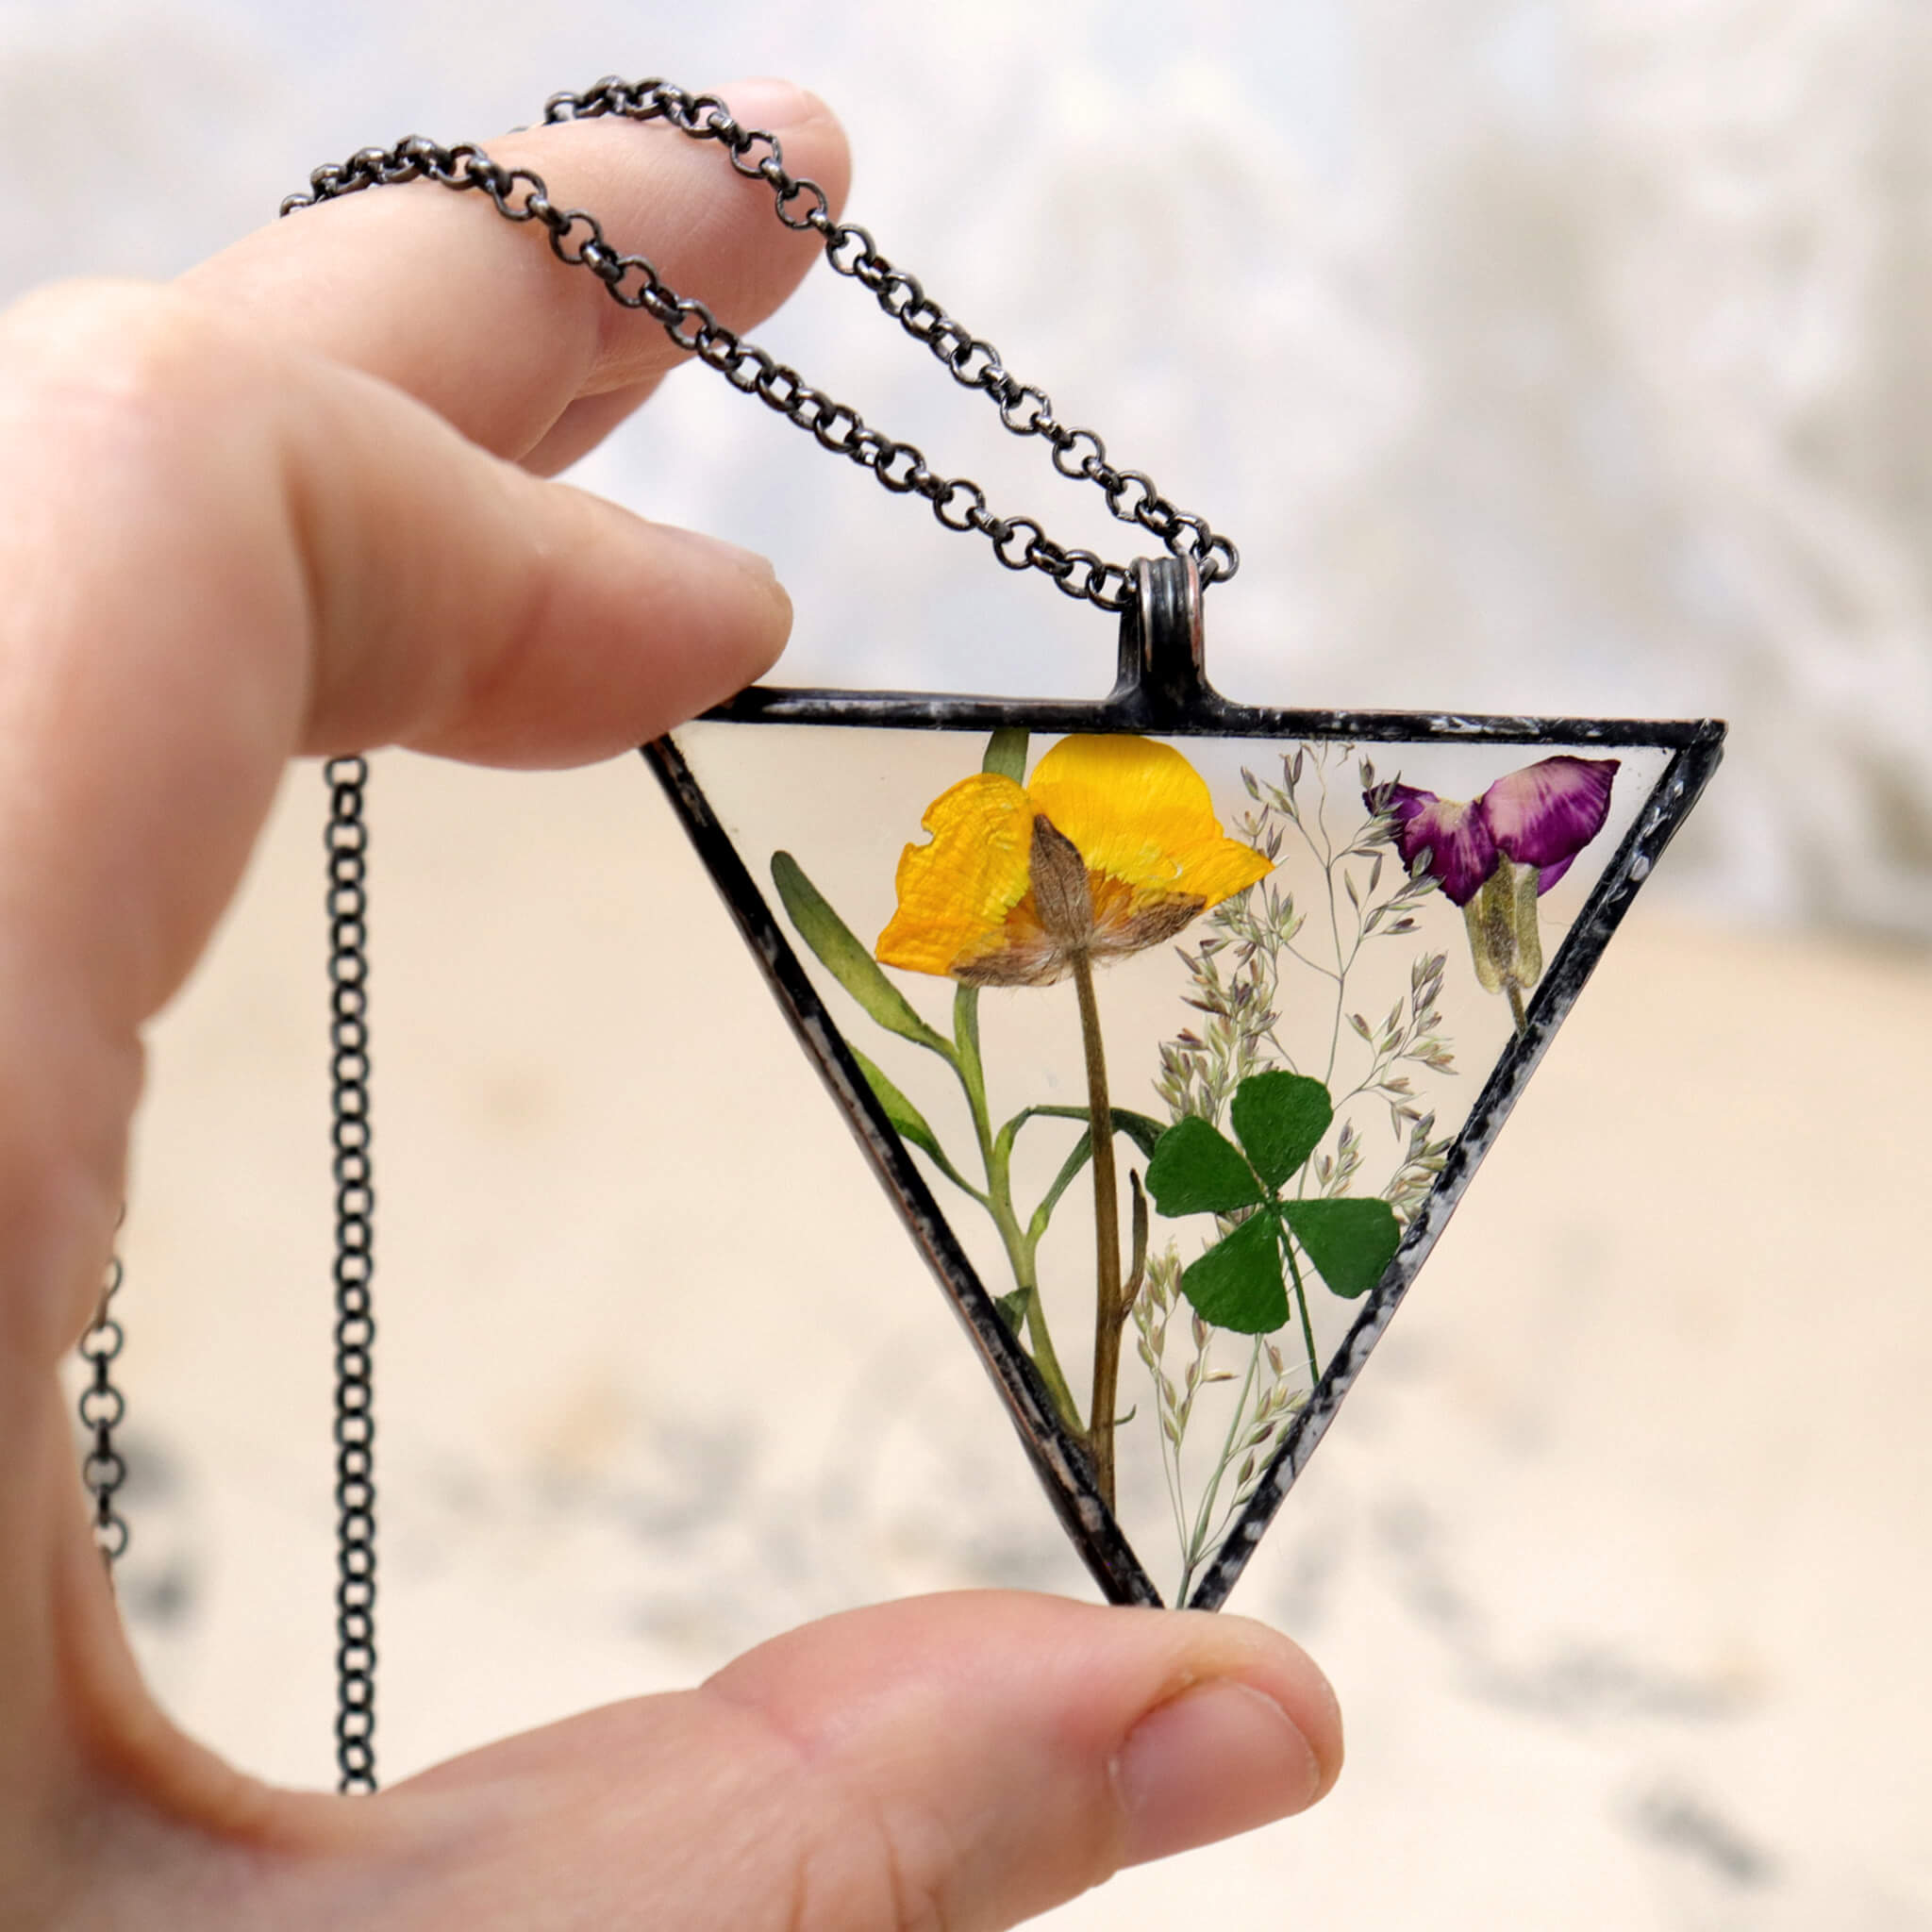 Hand holding Triangular yellow and green pressed flowers necklace